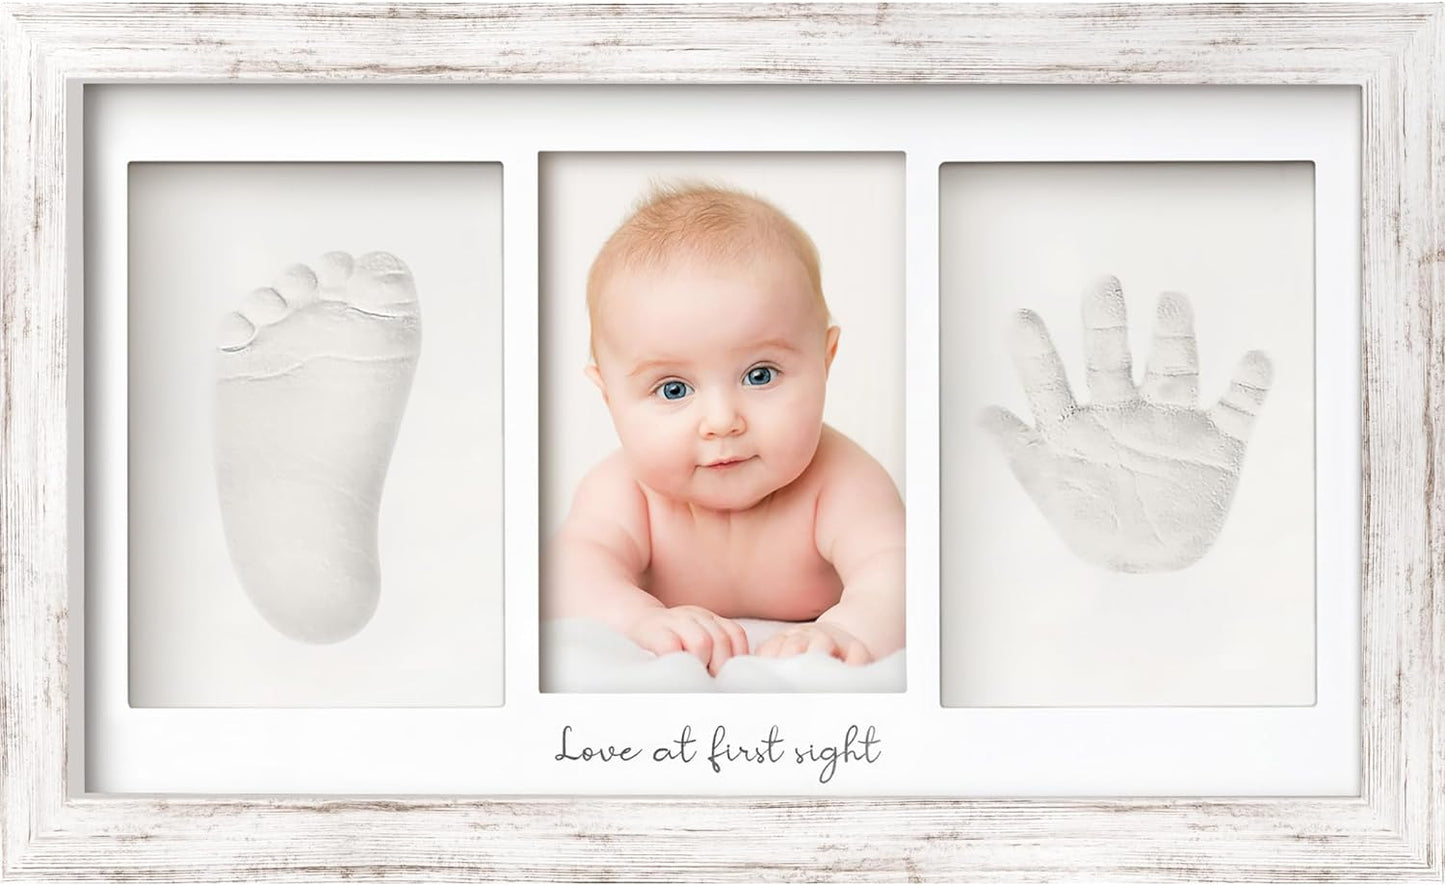 Baby Hand and Footprint Kit - Baby Footprint Kit, Newborn Keepsake Frame, Baby Handprint Kit, Personalized Baby Gifts, Nursery Decor, Baby Shower Gifts for Girls Boys (Sage)